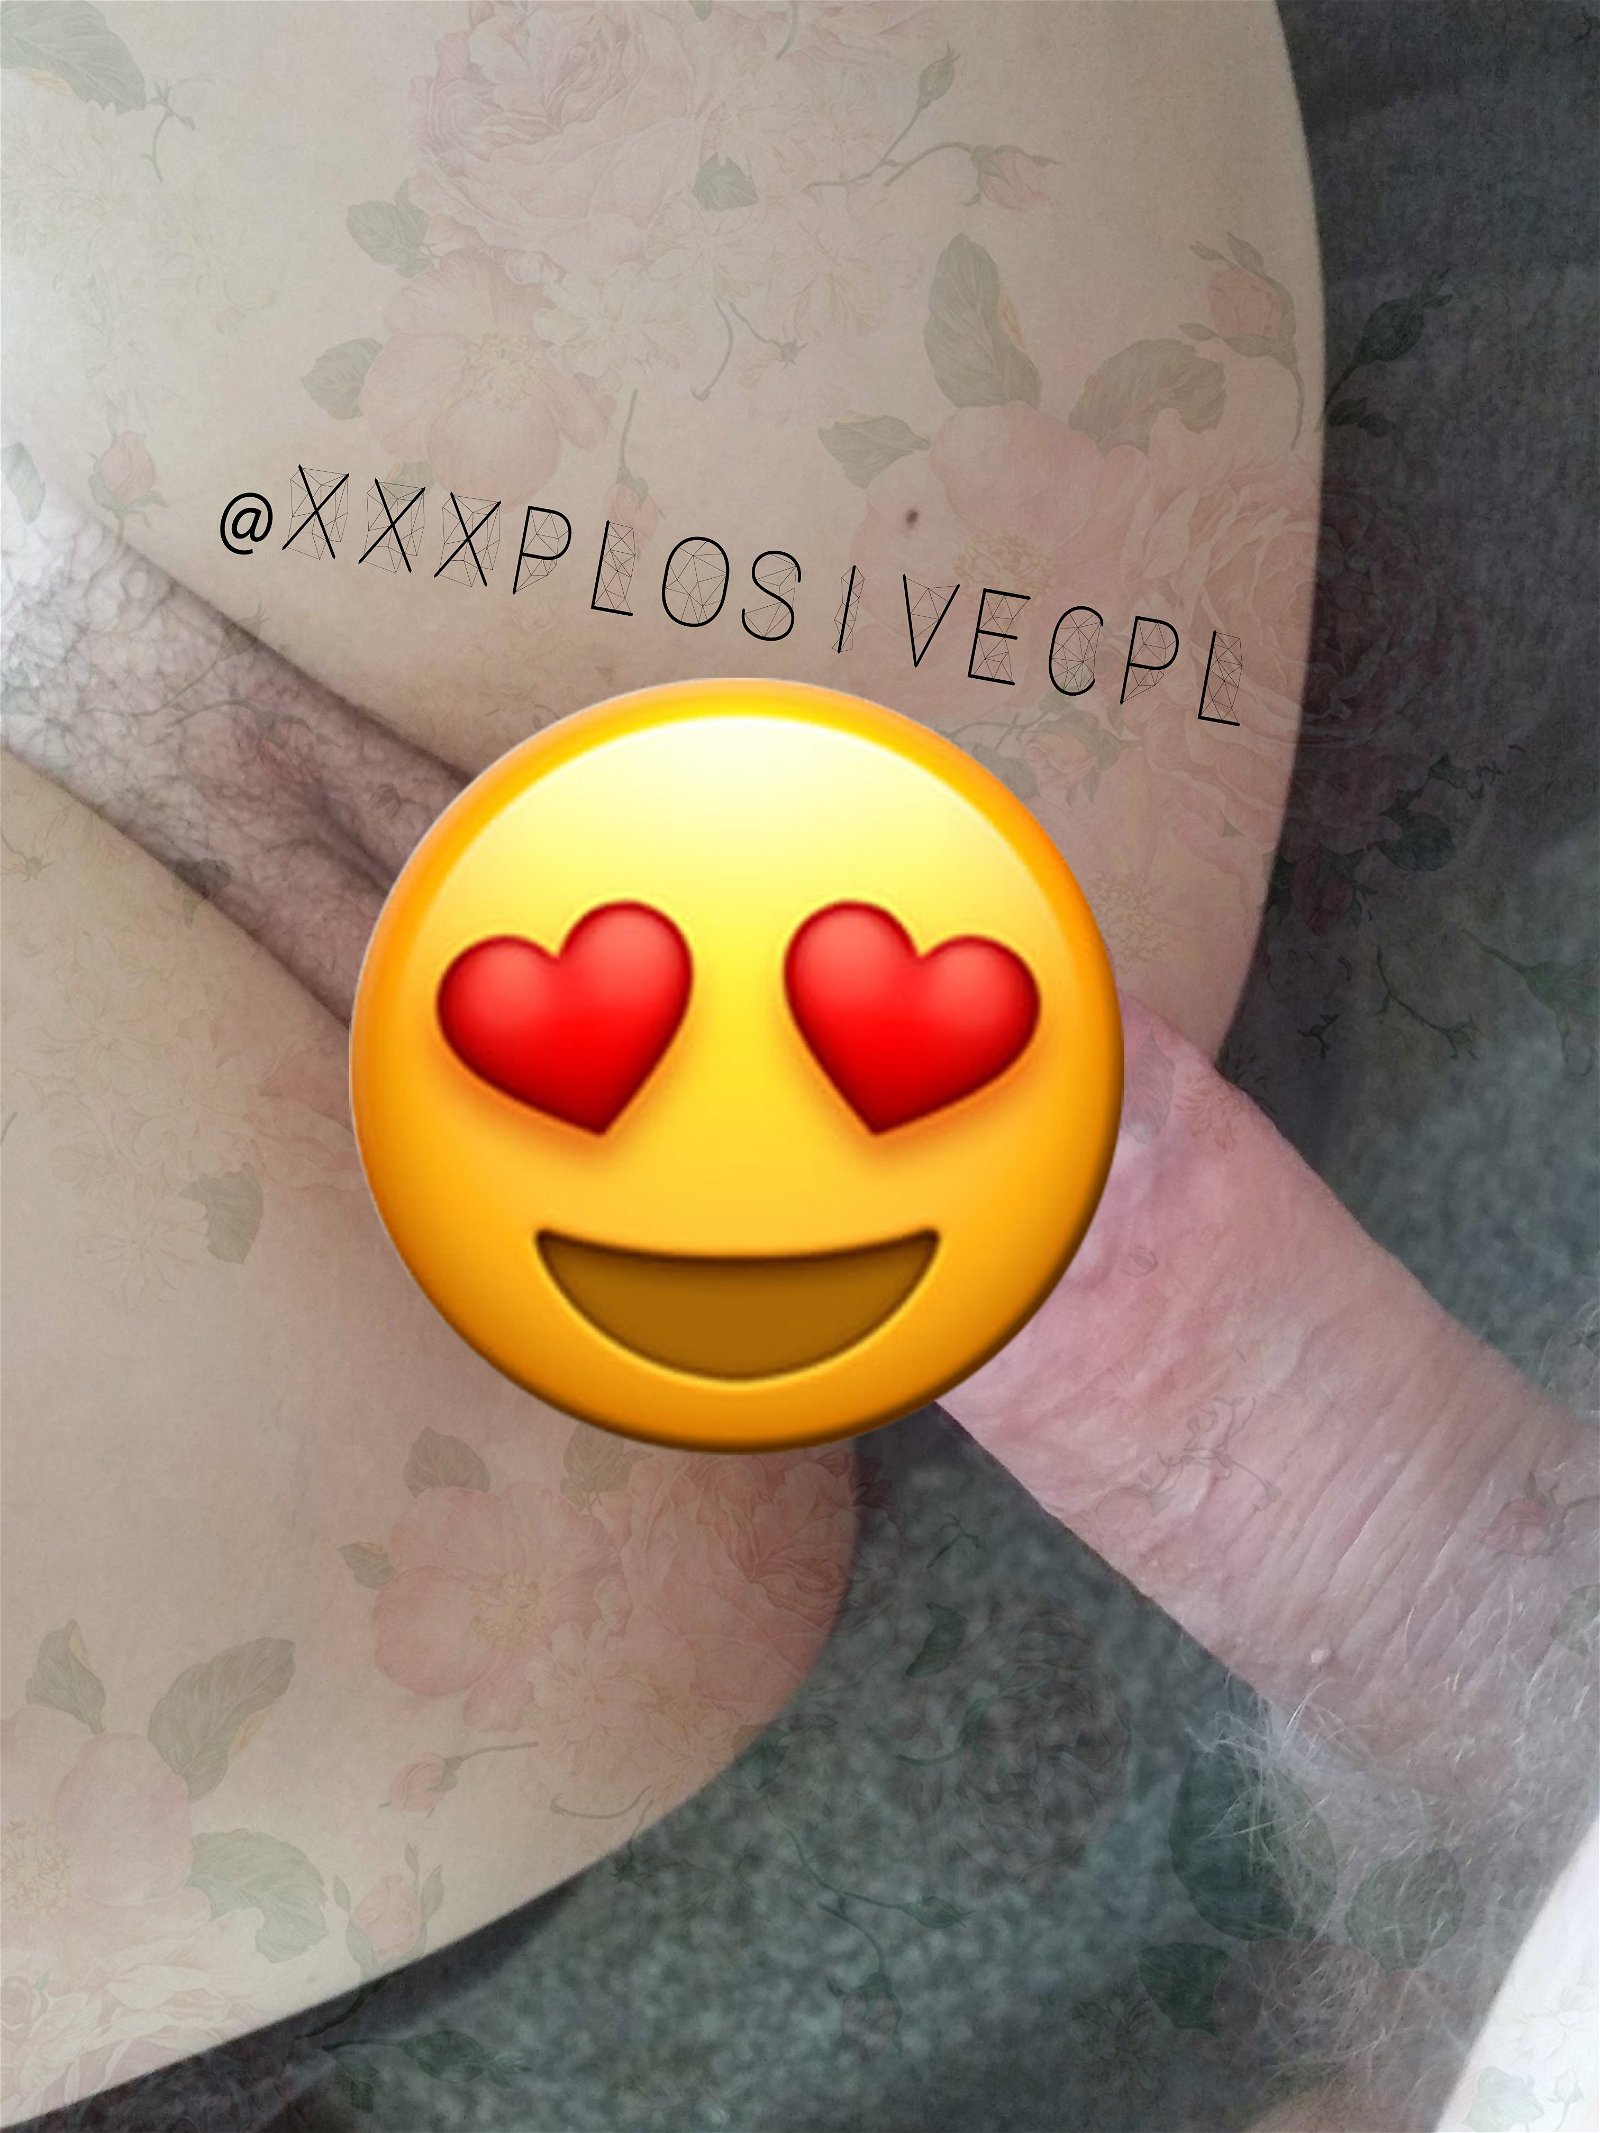 Watch the Photo by XXXplosivecpl with the username @xxxplosivecpl, posted on February 21, 2020. The post is about the topic MILF. and the text says 'Just joined today. How is everyone?'